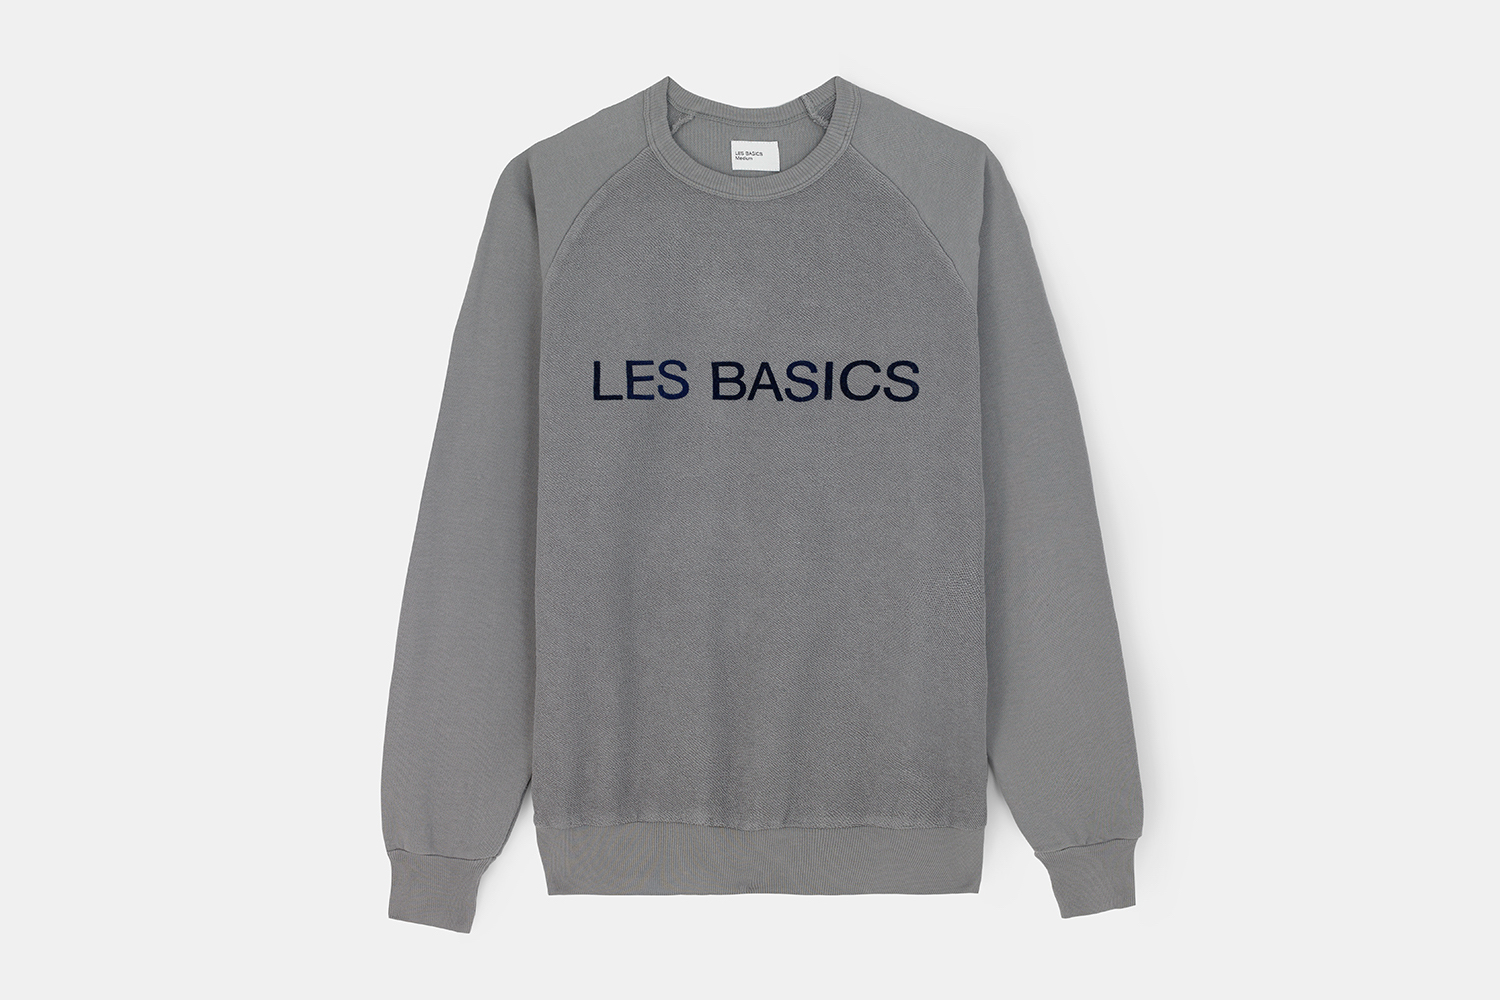 Les Basics' SS19 Collection: Shop It Here